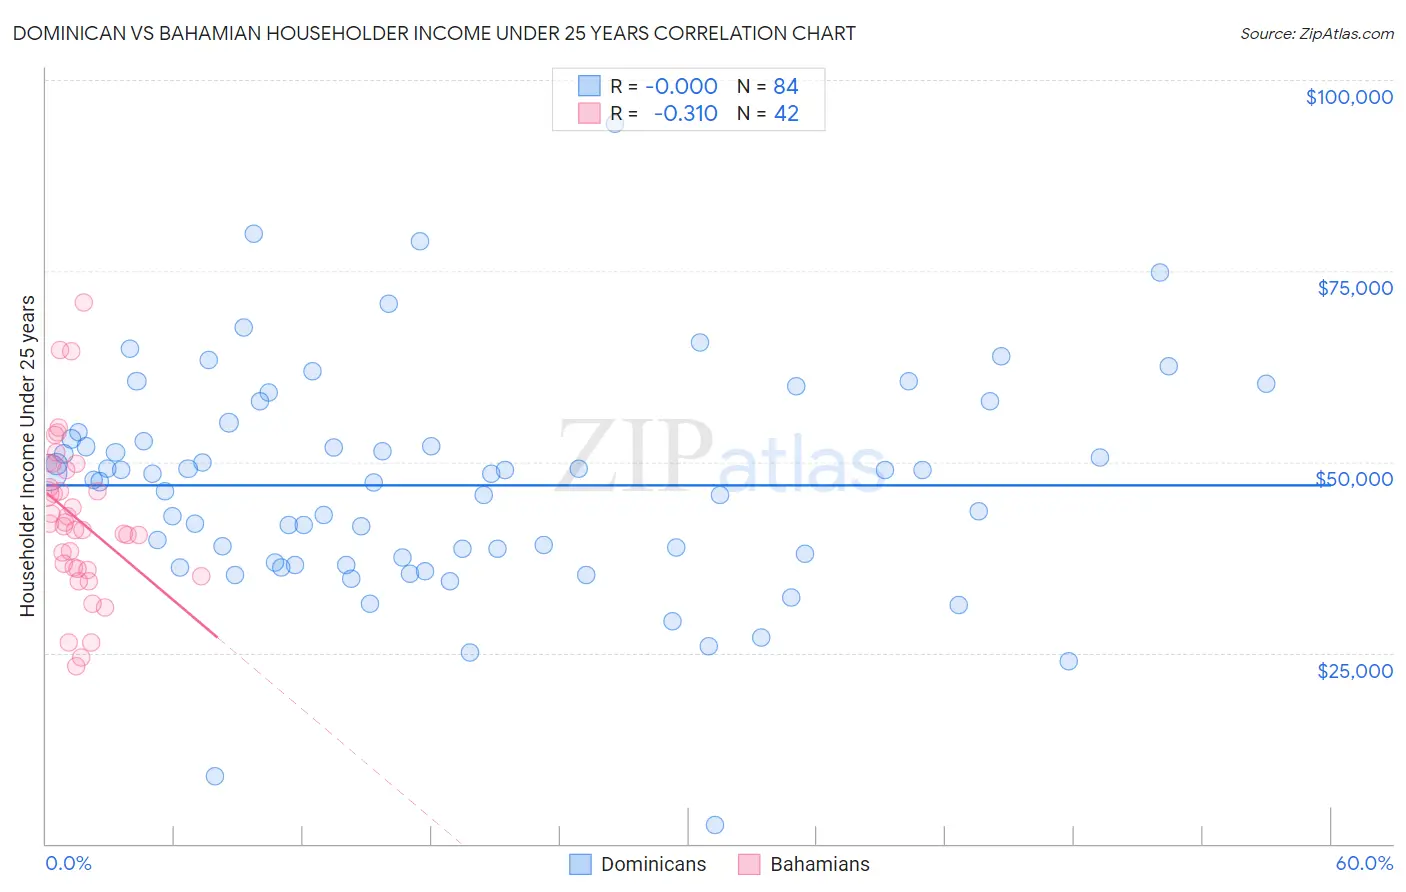 Dominican vs Bahamian Householder Income Under 25 years